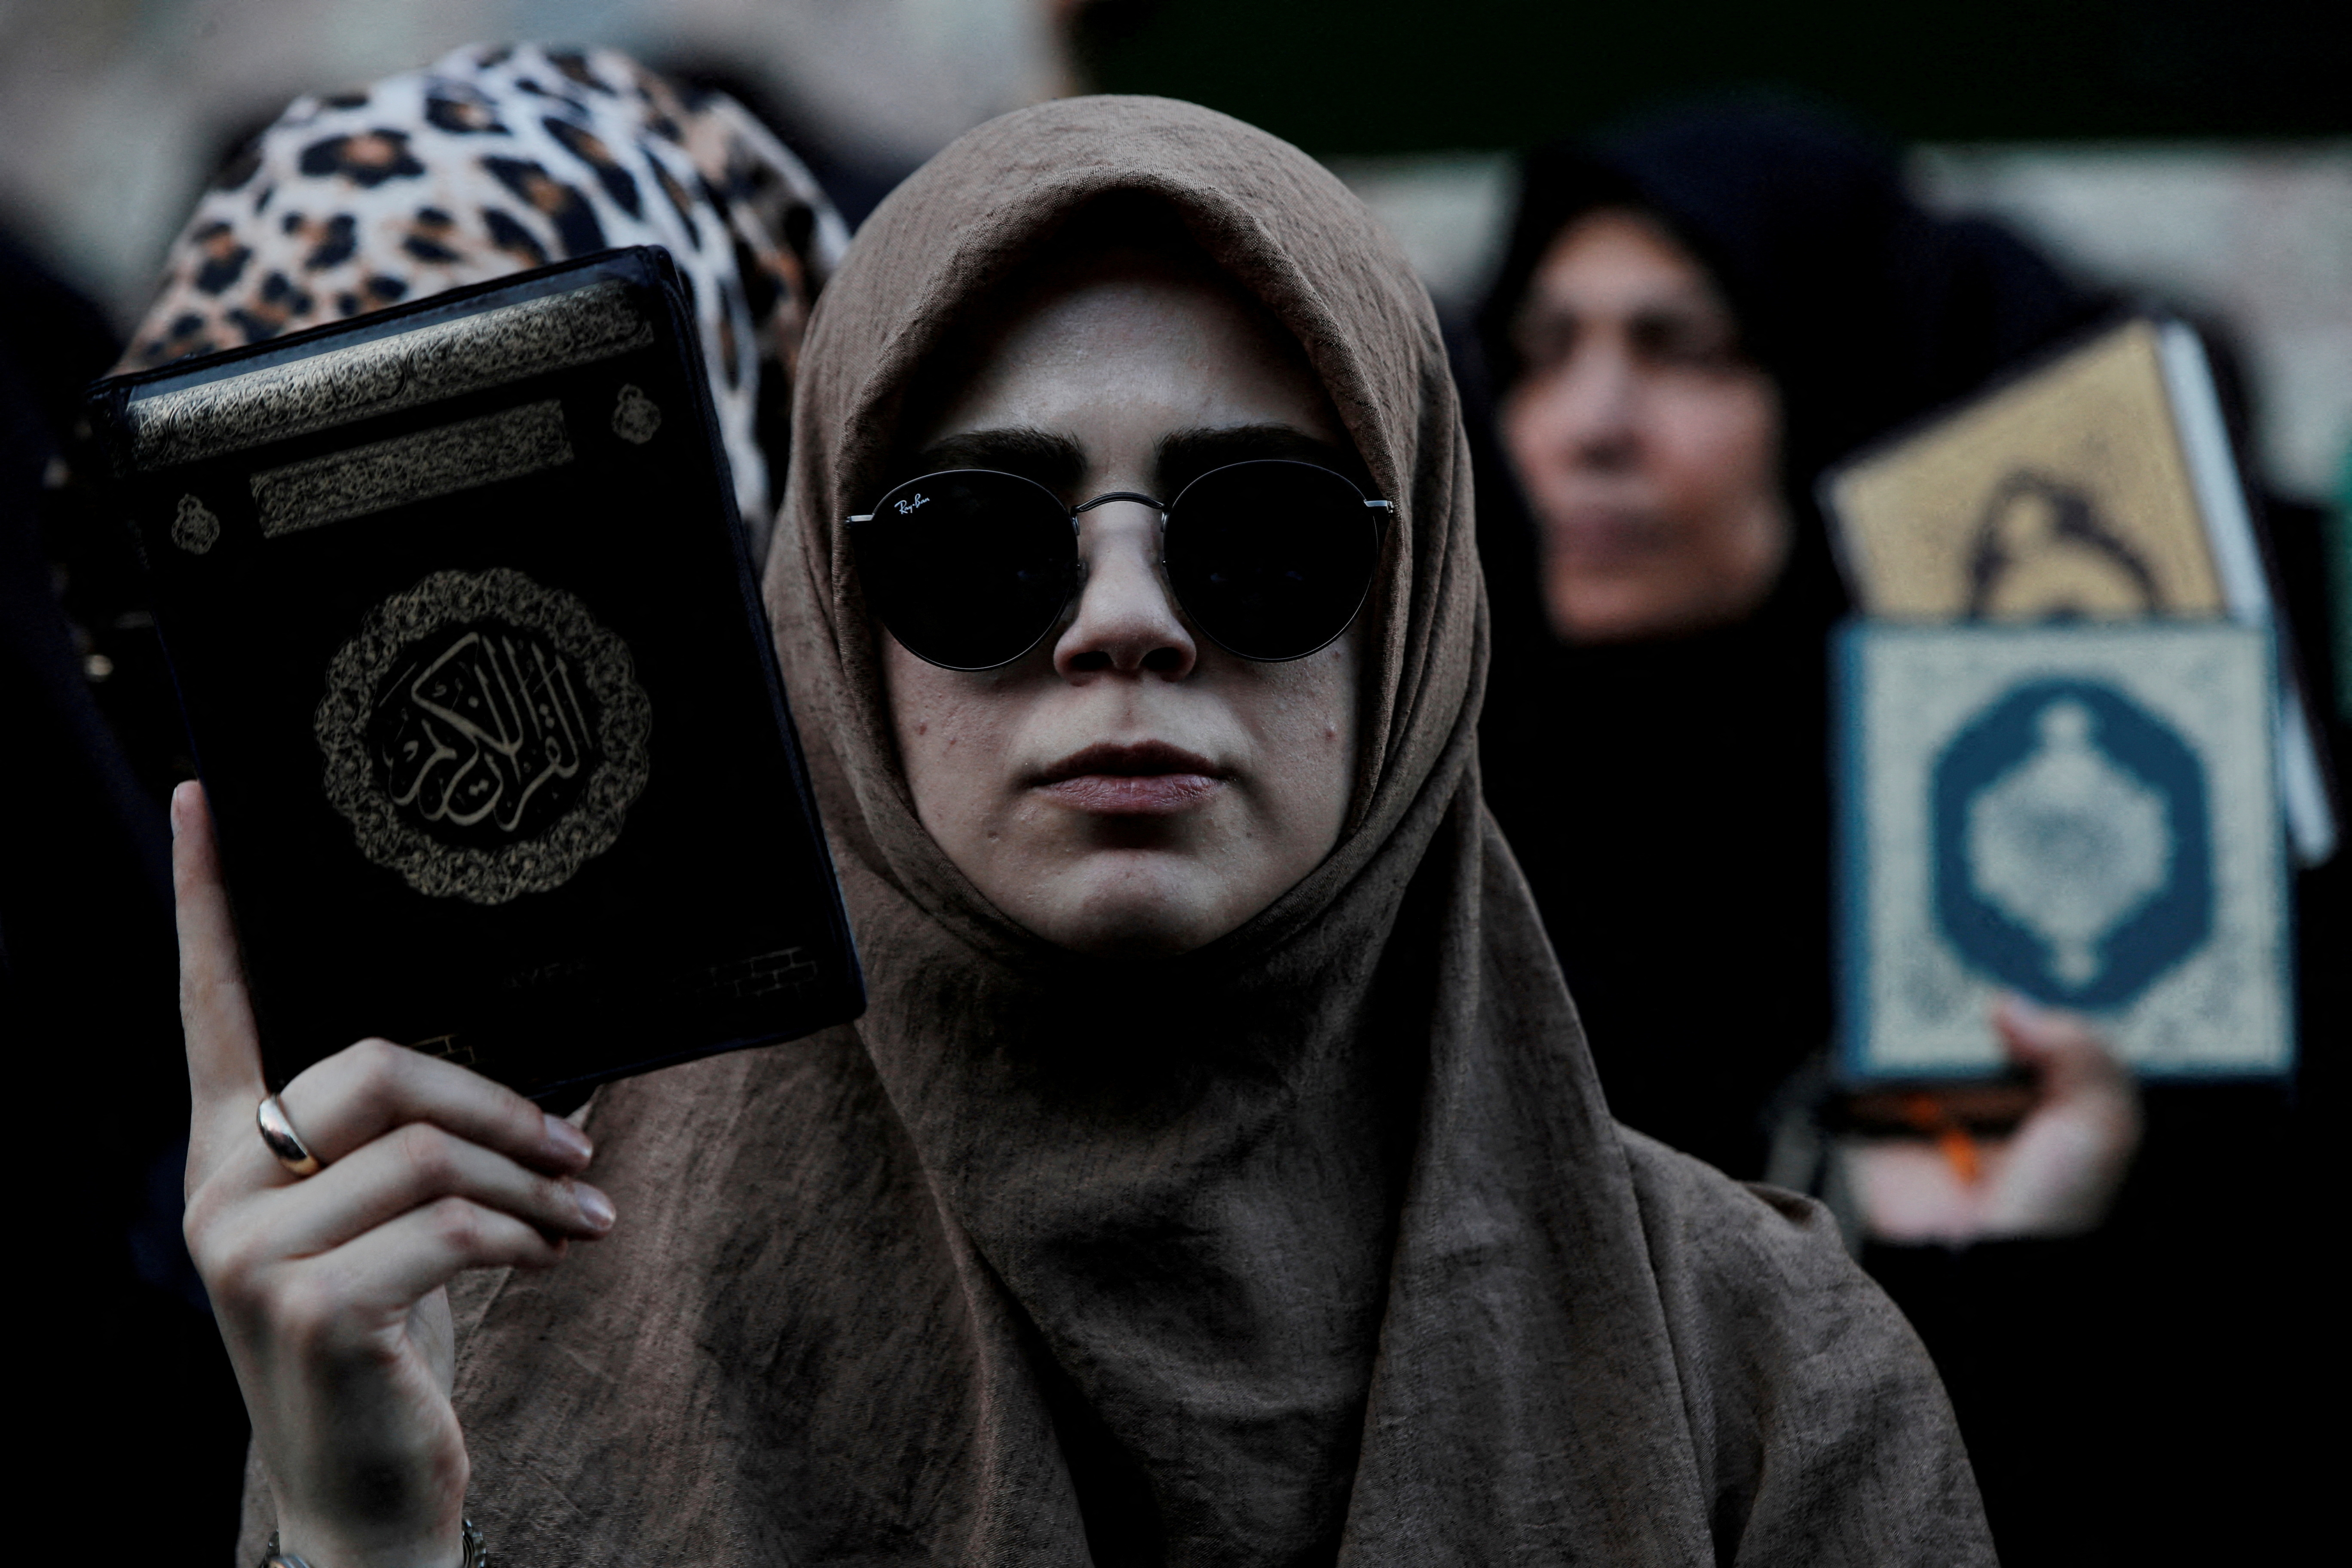 FILE PHOTO: Protesters hold copies of the Koran as they demonstrate outside the Consulate General of Sweden in Istanbul